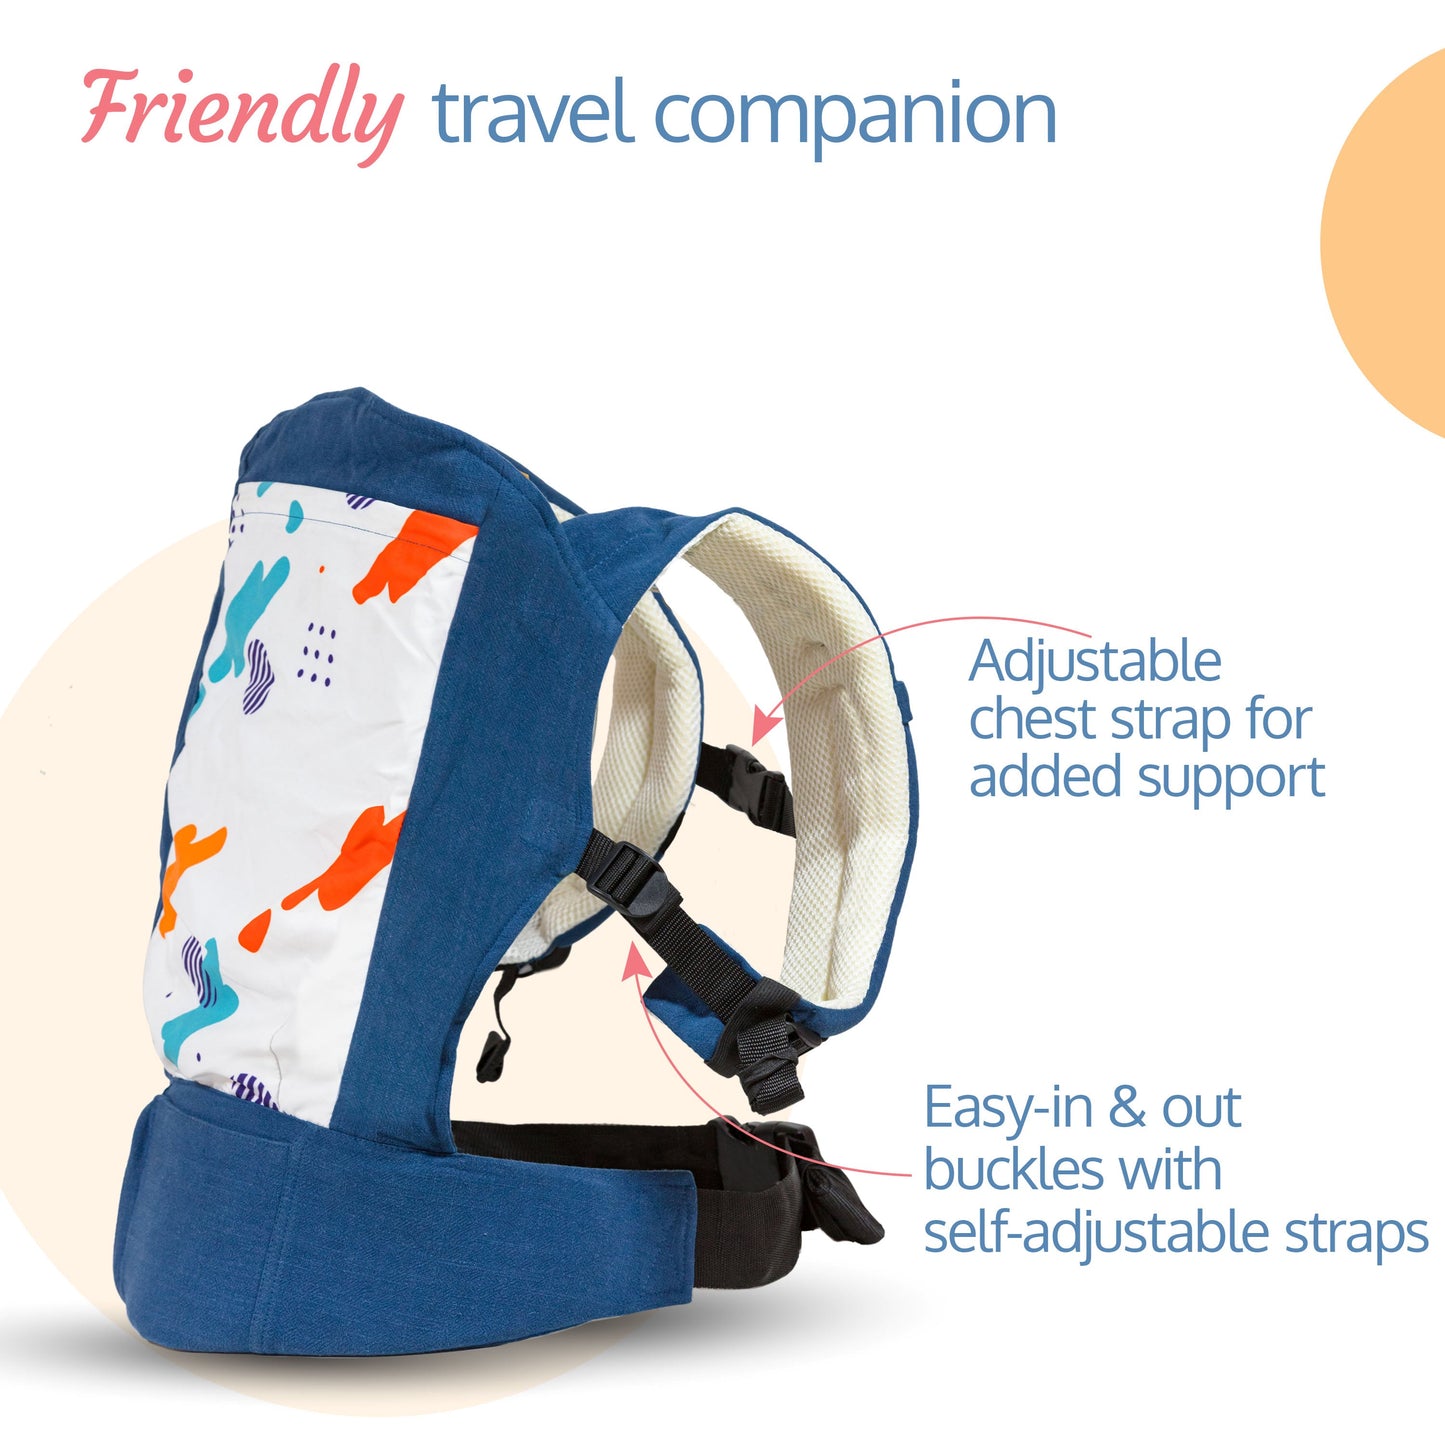 Adore Baby Carrier With 2 Carry Positions (Blue)